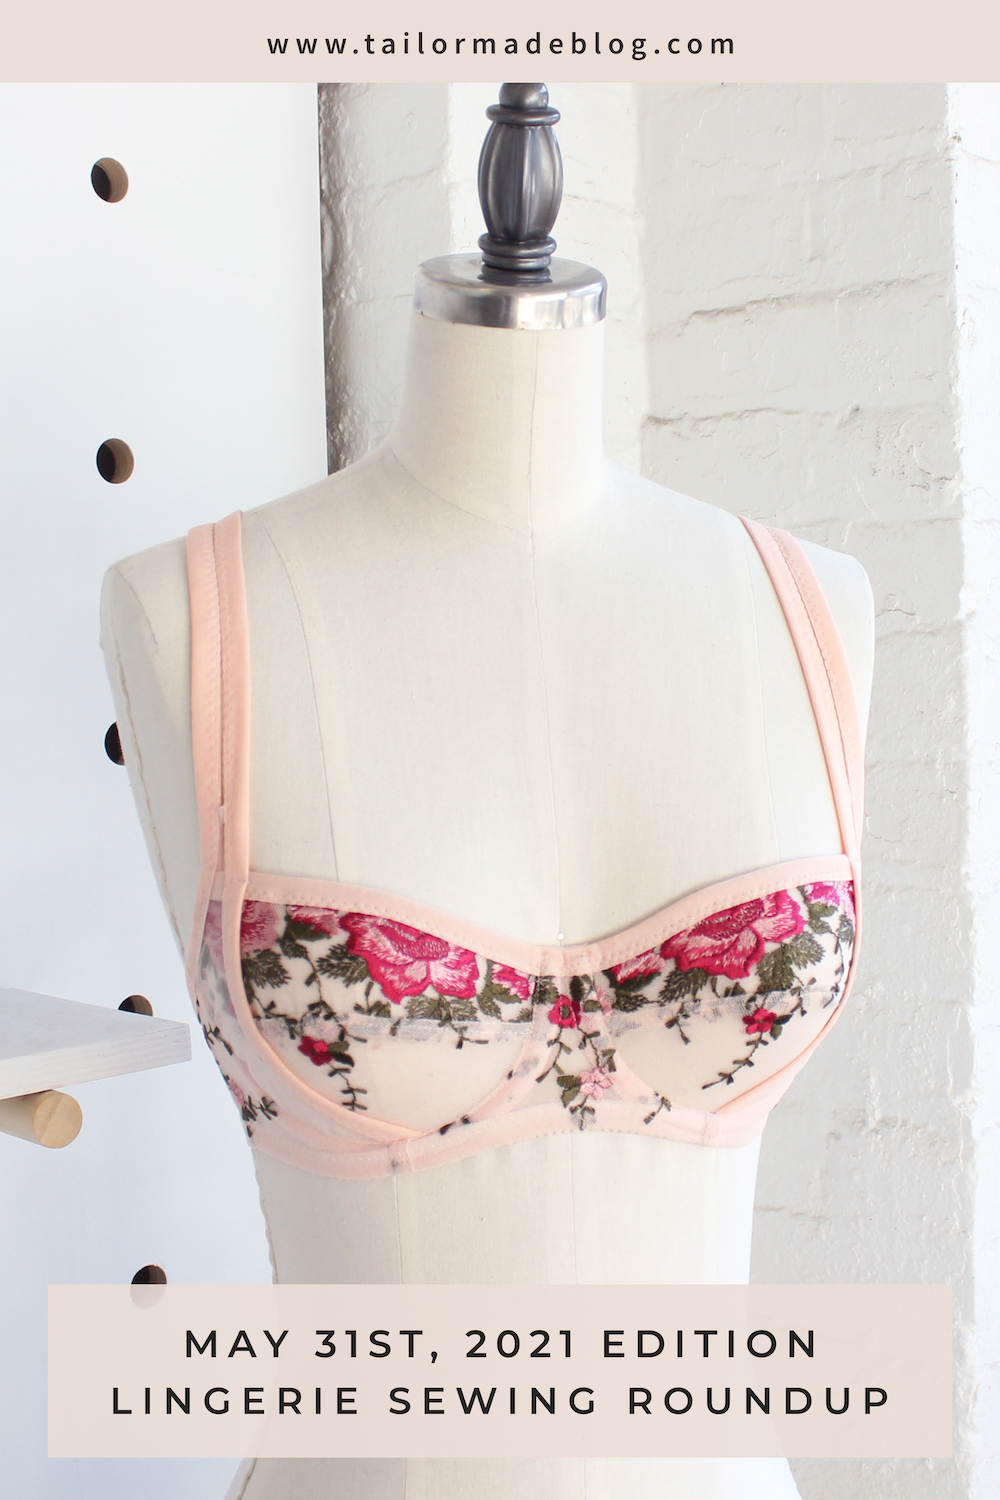 Bra making for beginners, Bra sewing and fabrics explained